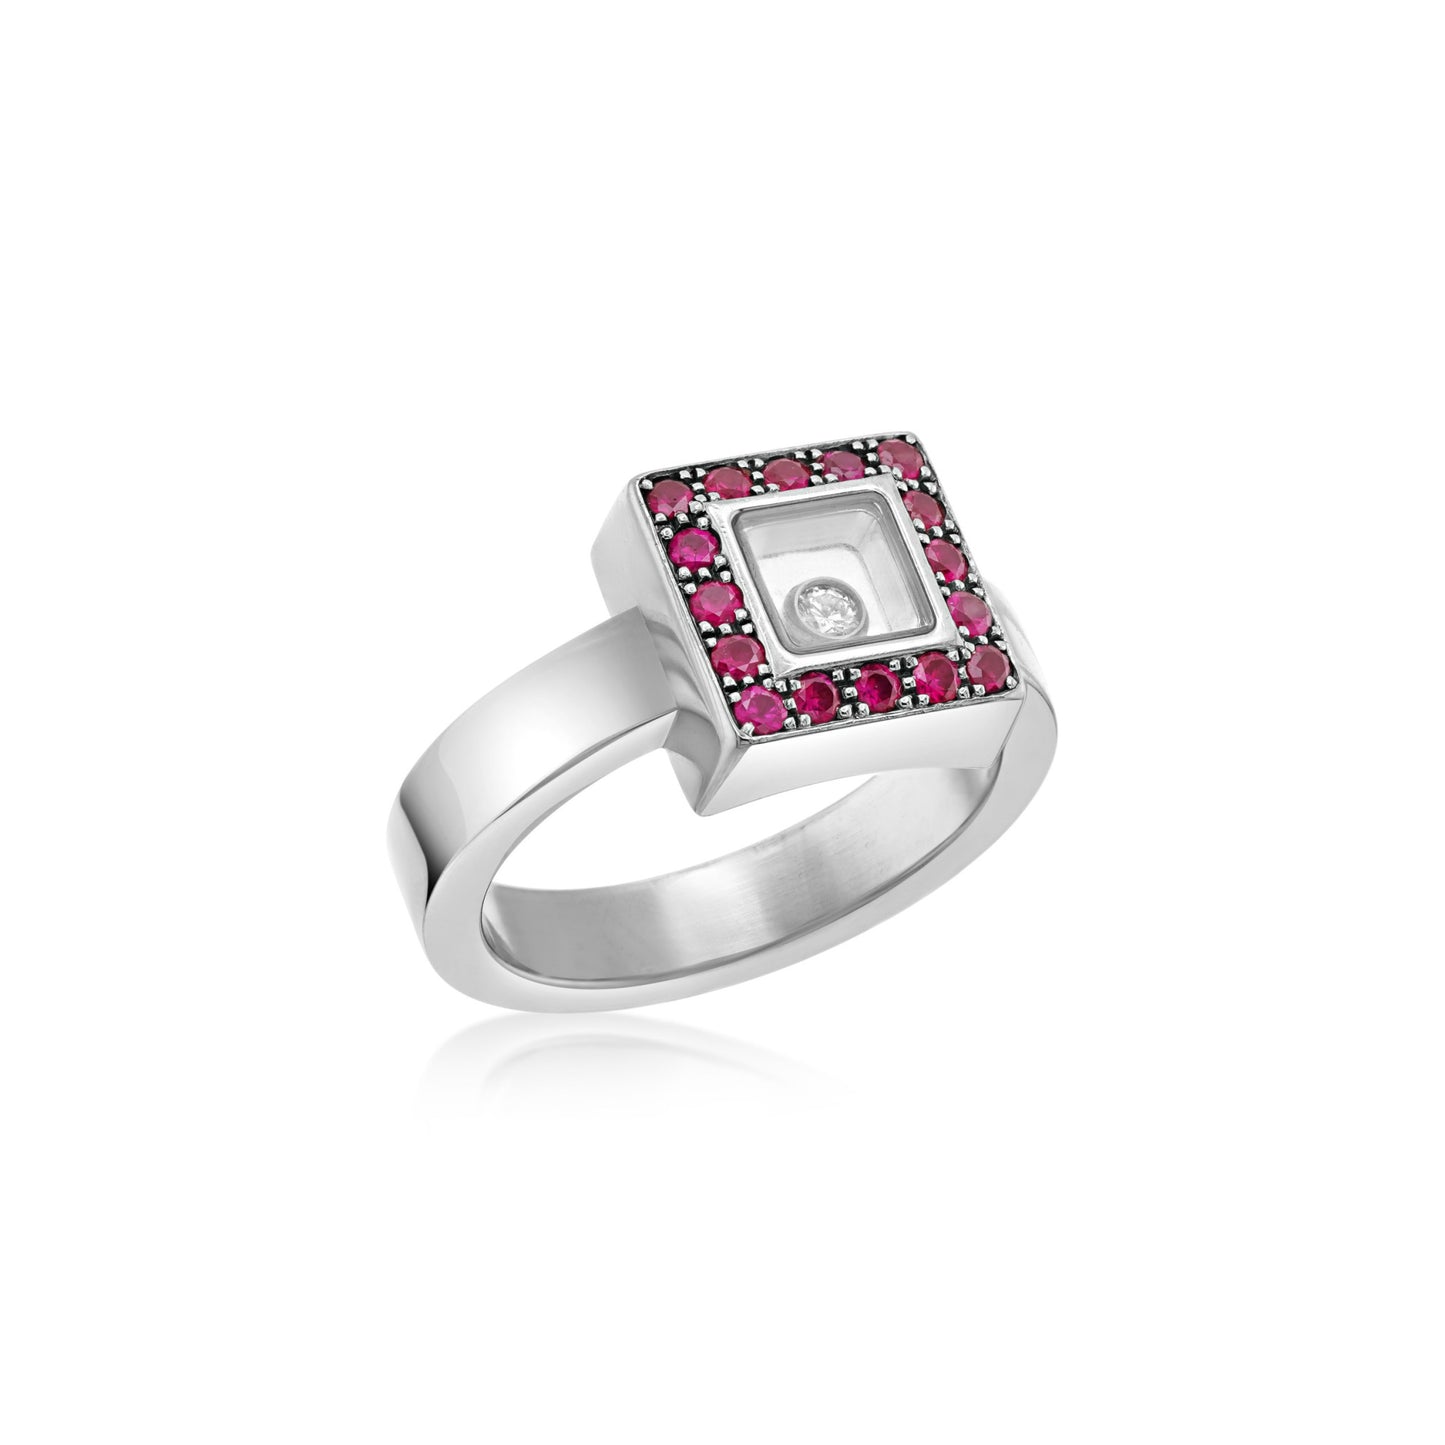 Chopard Post-1980s 18KT White Gold Ruby & Diamond Ring front and side